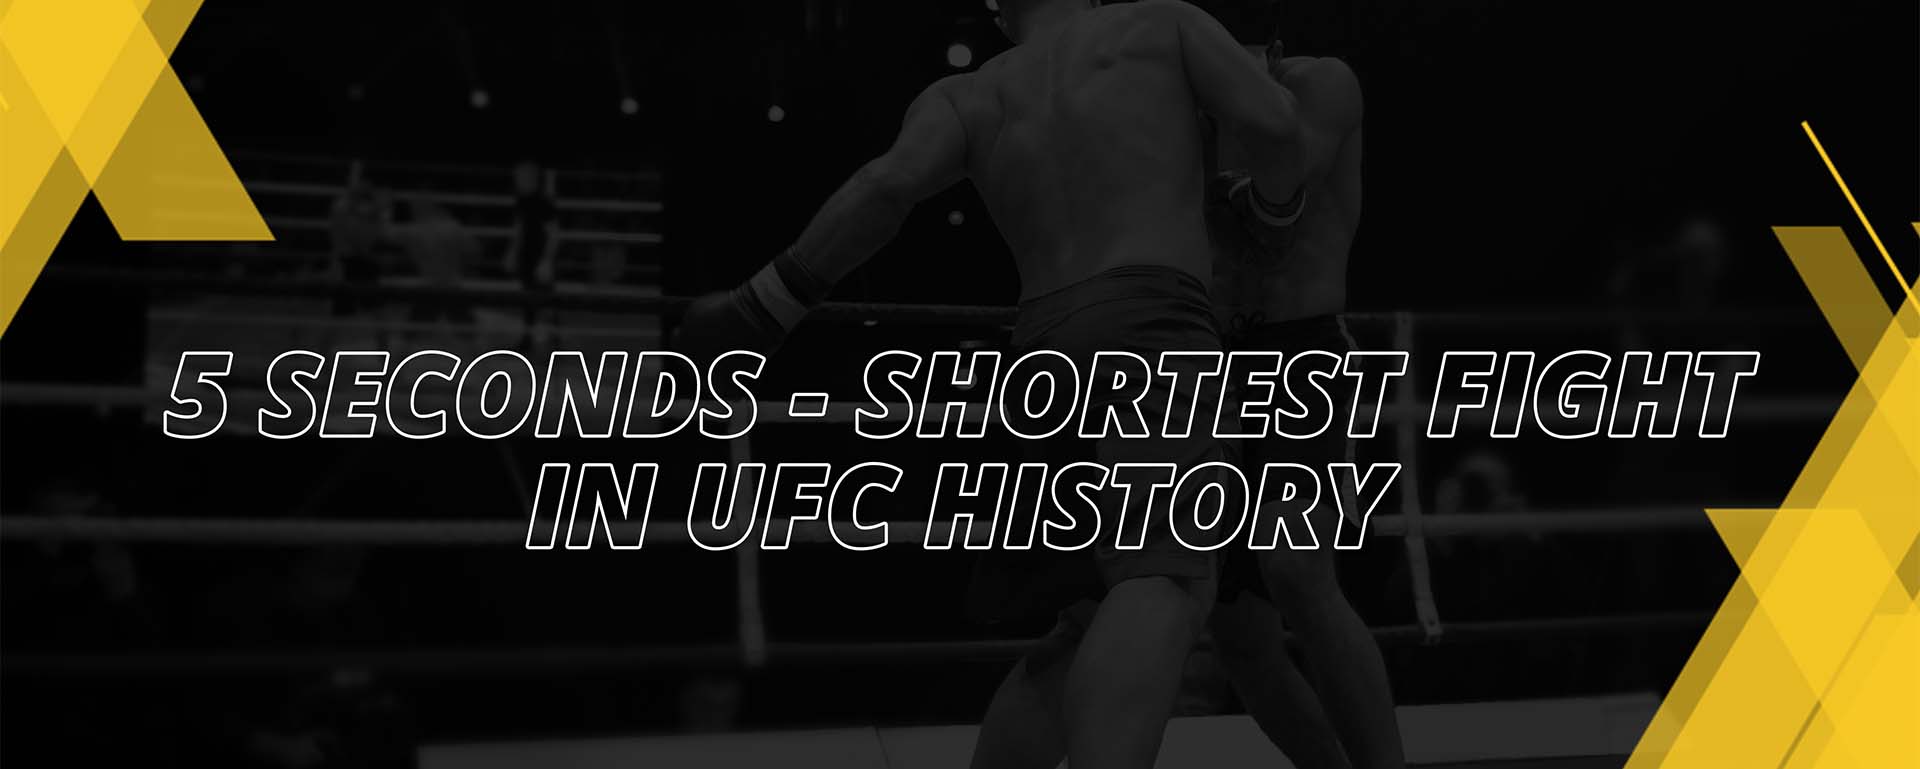 5 SECONDS – SHORTEST FIGHT IN UFC HISTORY